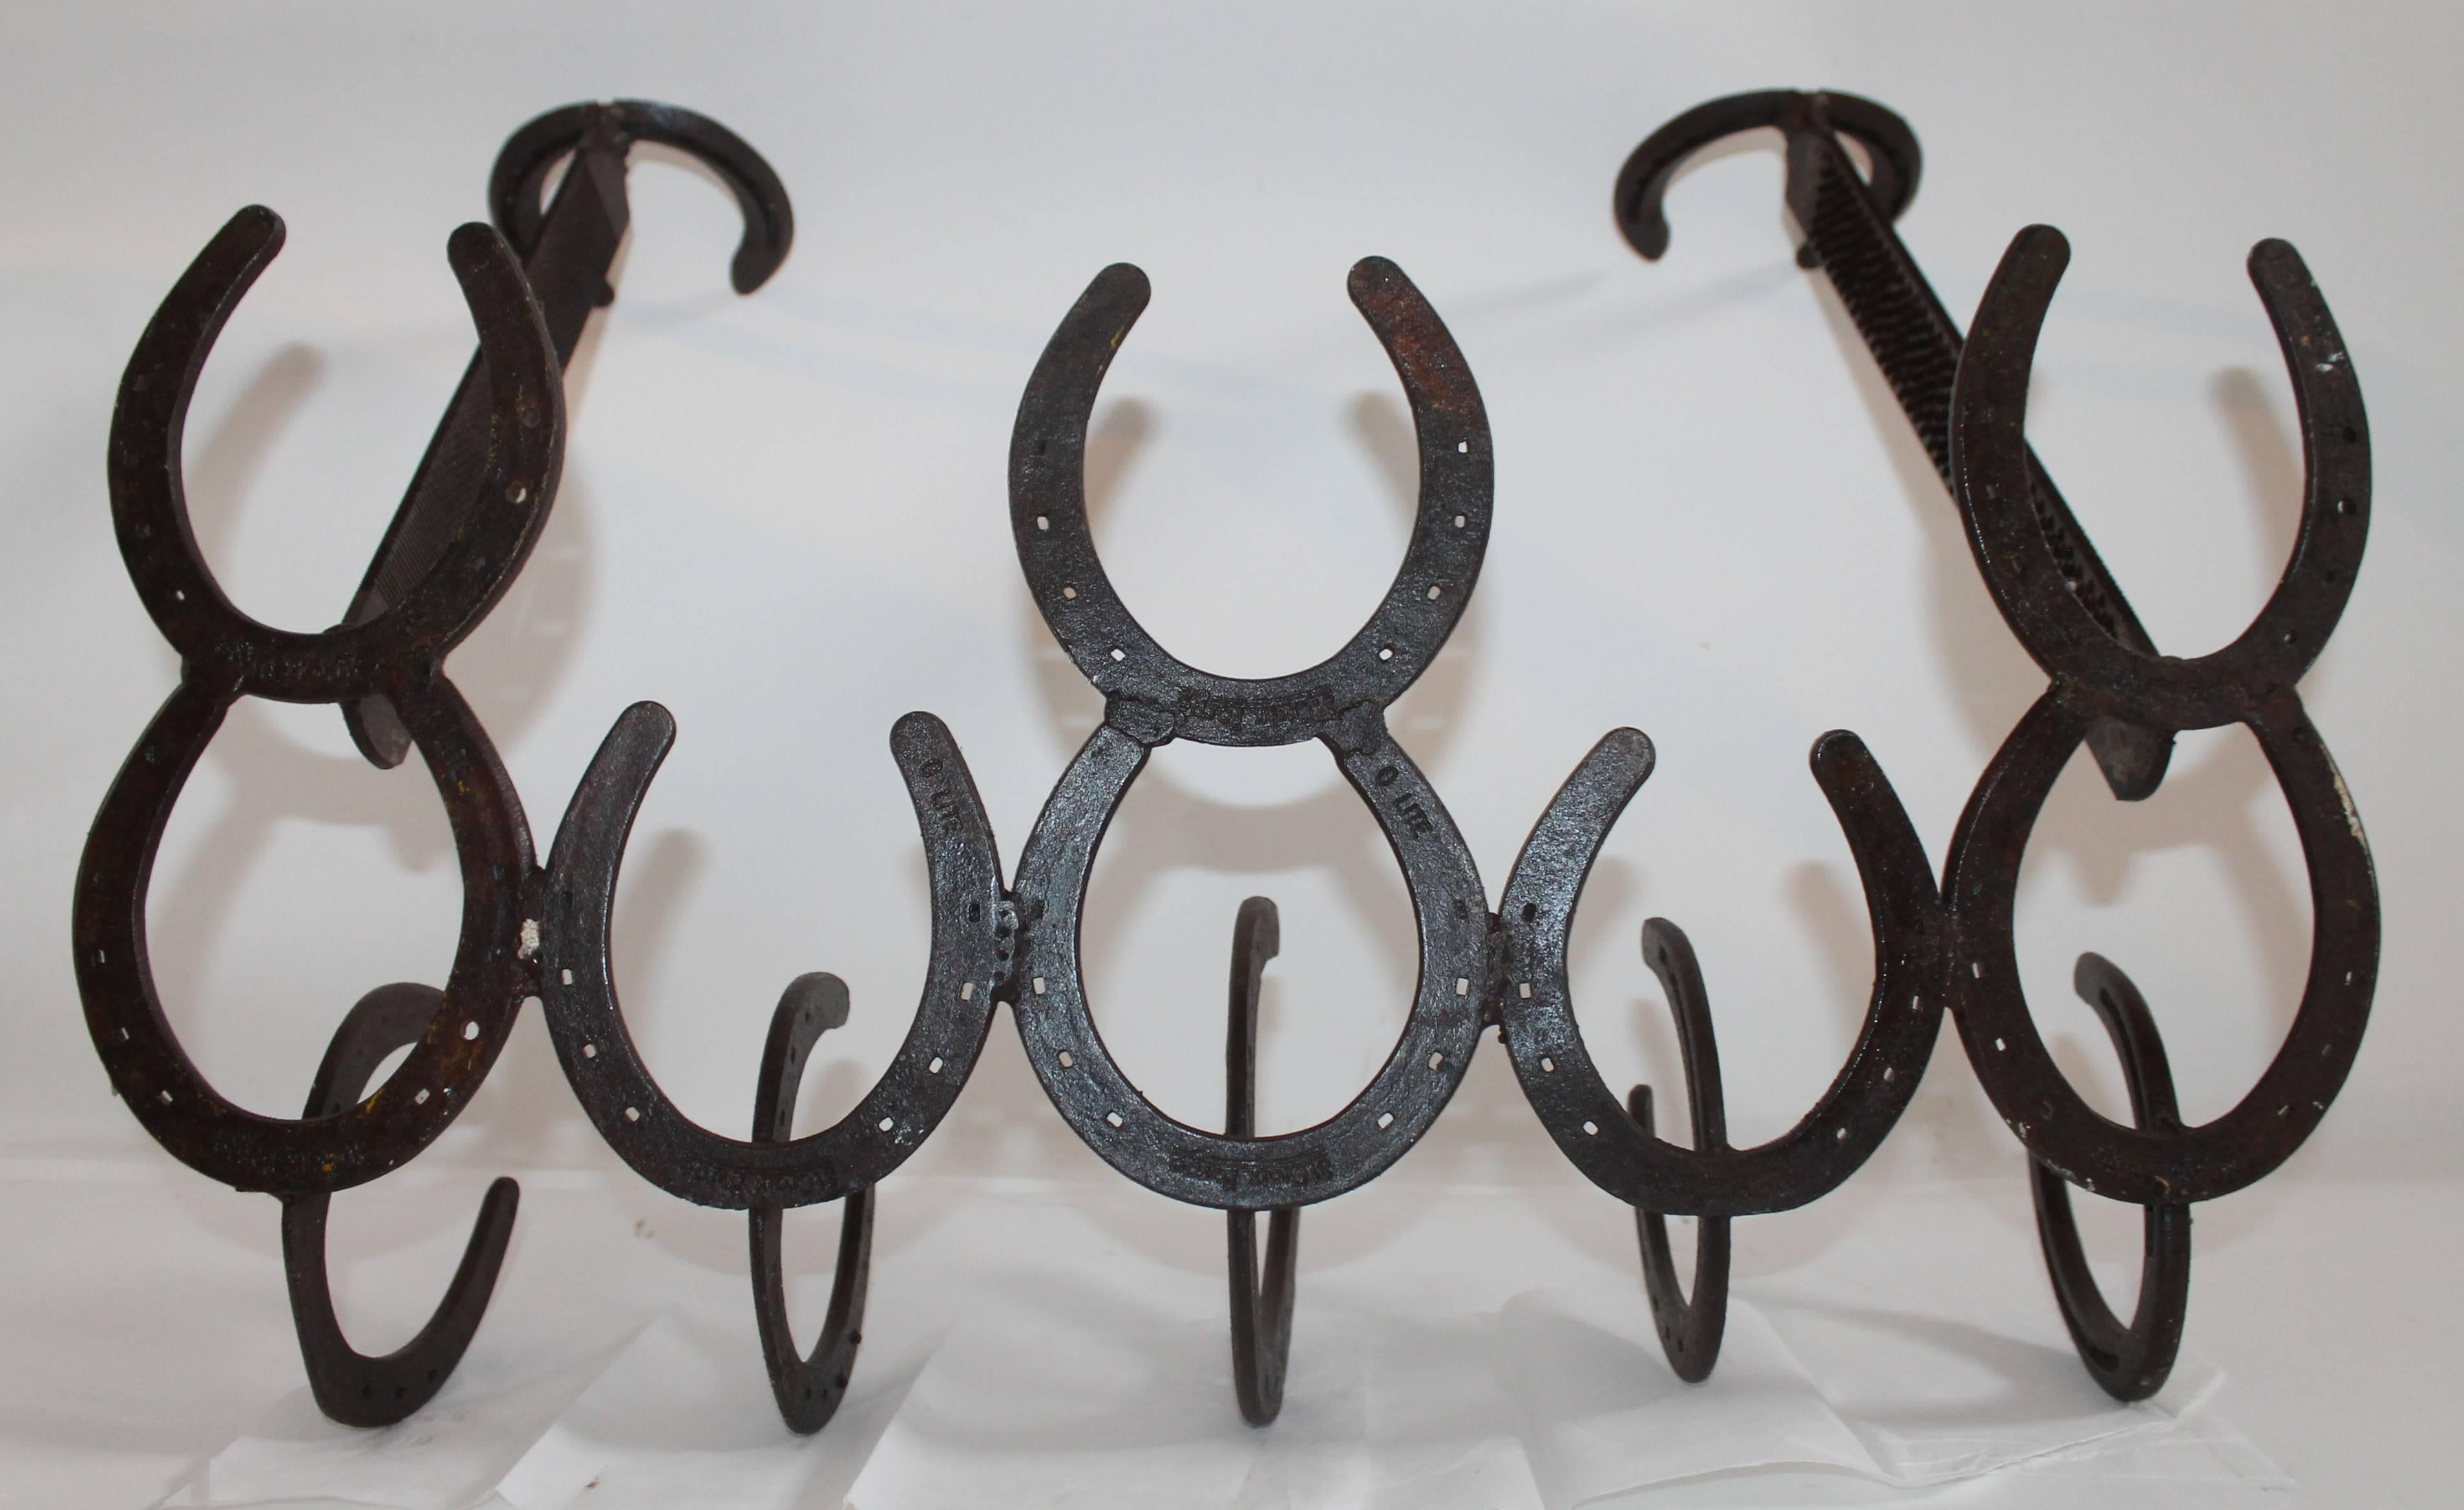 This handmade iron horse shoe Folk Art hat and coat rack is in good condition. It has a great rustic and western appeal.